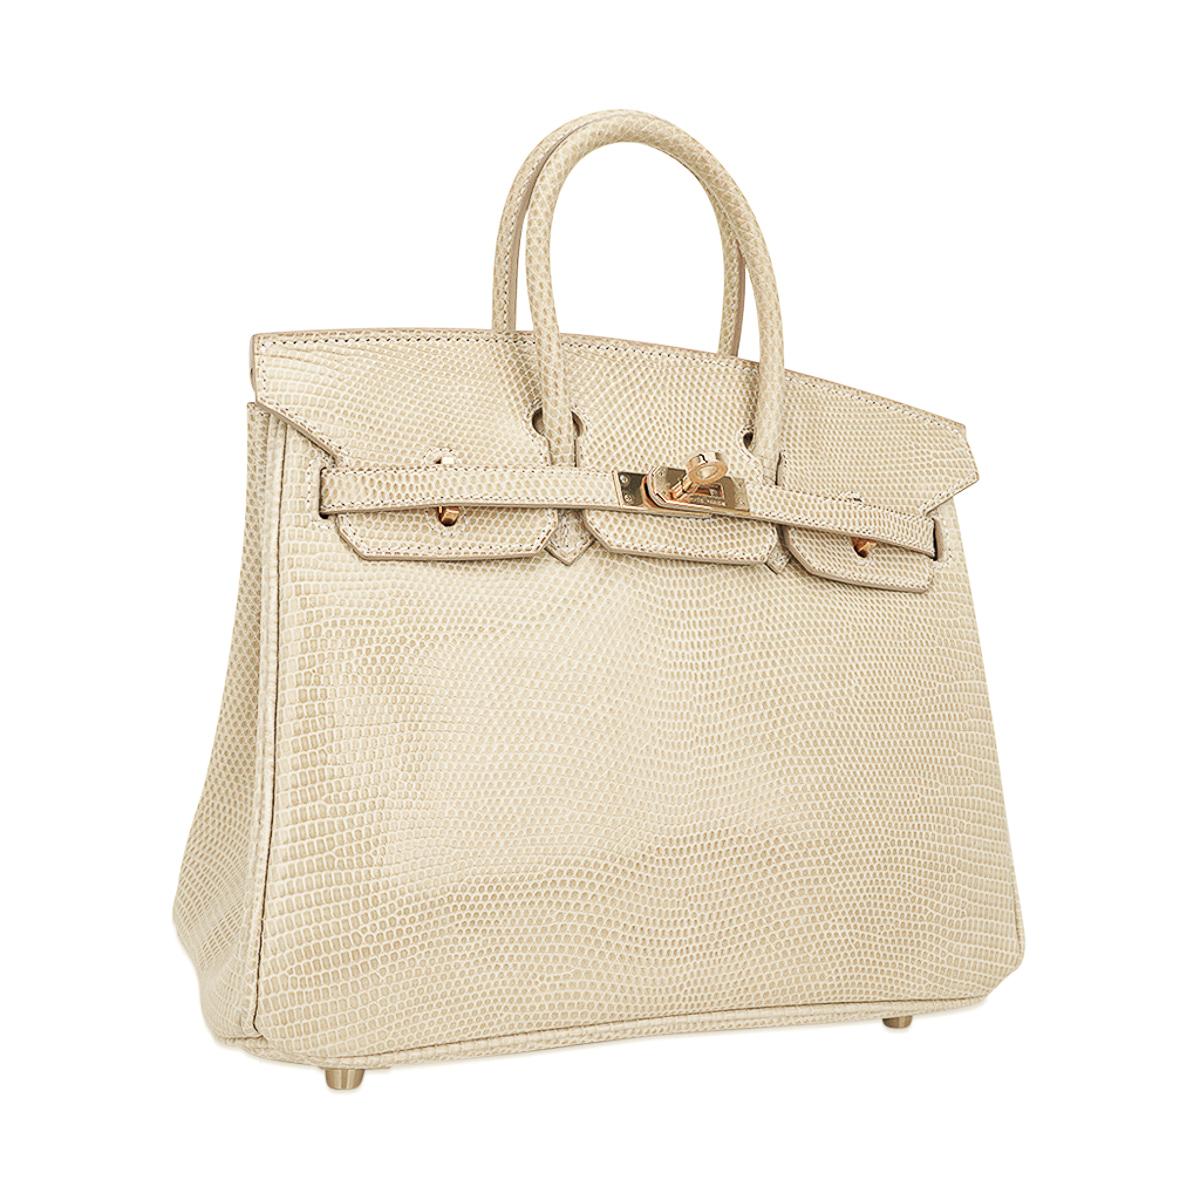 Mightychic offers a limited edition Hermes Birkin 25 bag featured in Blanc Casse lizard.
Exquisite pale buttery cream with lush Gold hardware.
The most sublime colour, this rare beauty is a collectors treasure!
Elegant and understated.
Comes with